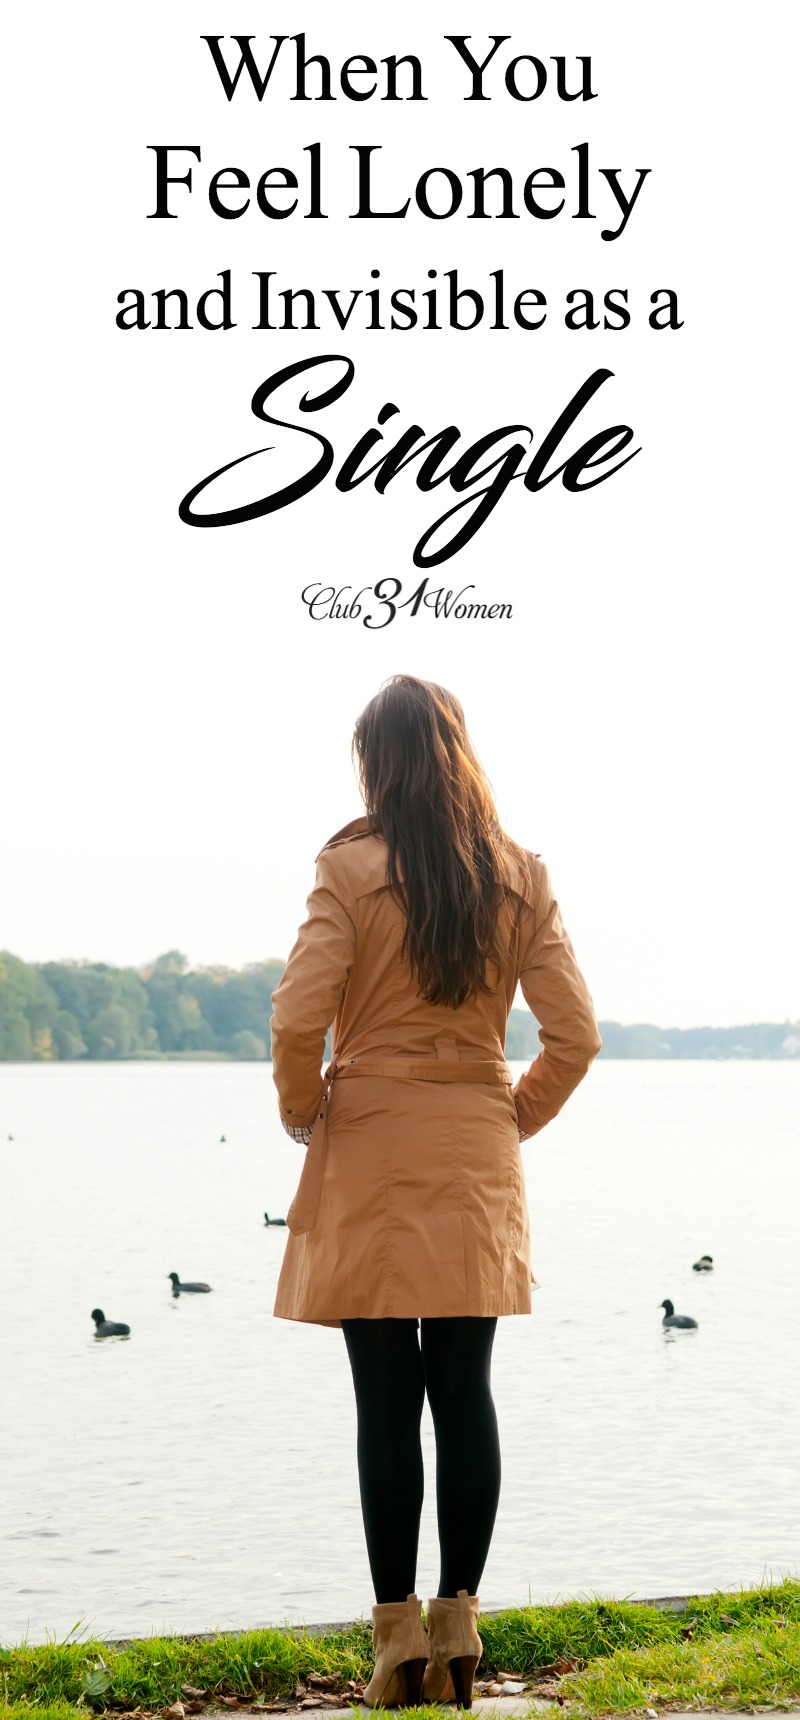 If you're in a season of being single, how can you stay well in that season? In what ways can you cling to God and trust His timing for your life? via @Club31Women